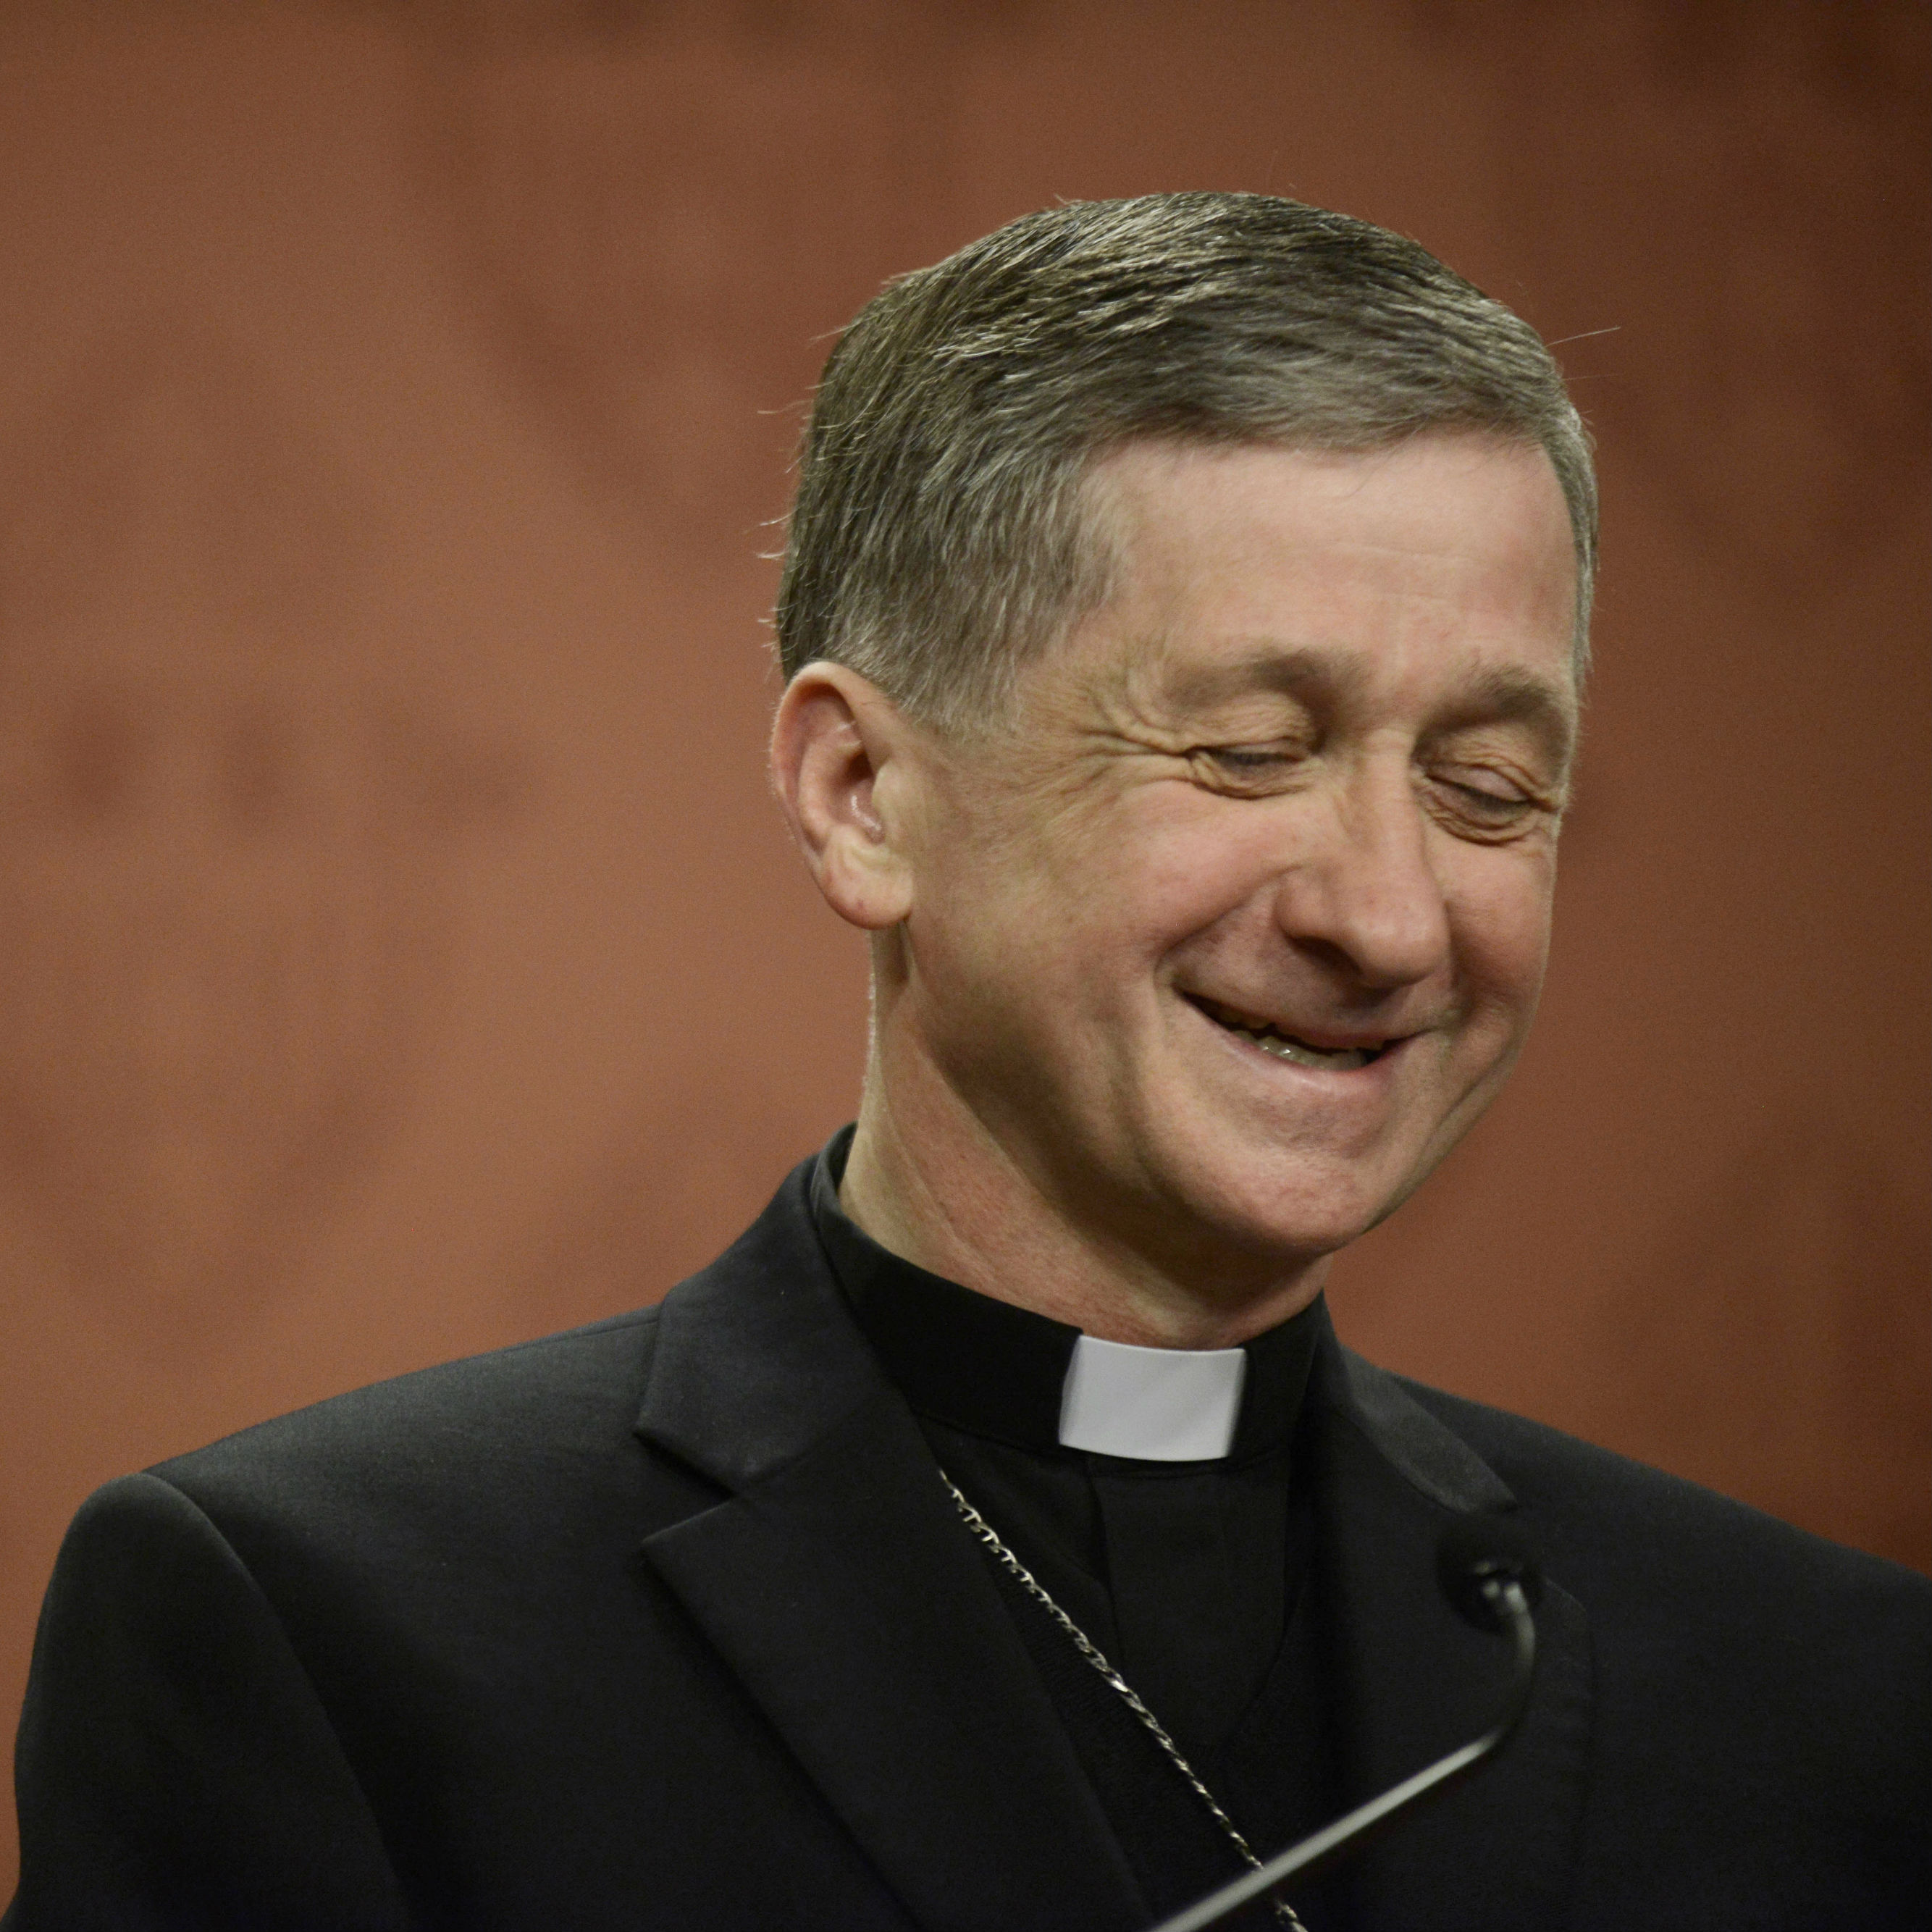 Pope appoints Chicago Archbishop to Congregation for Bishops